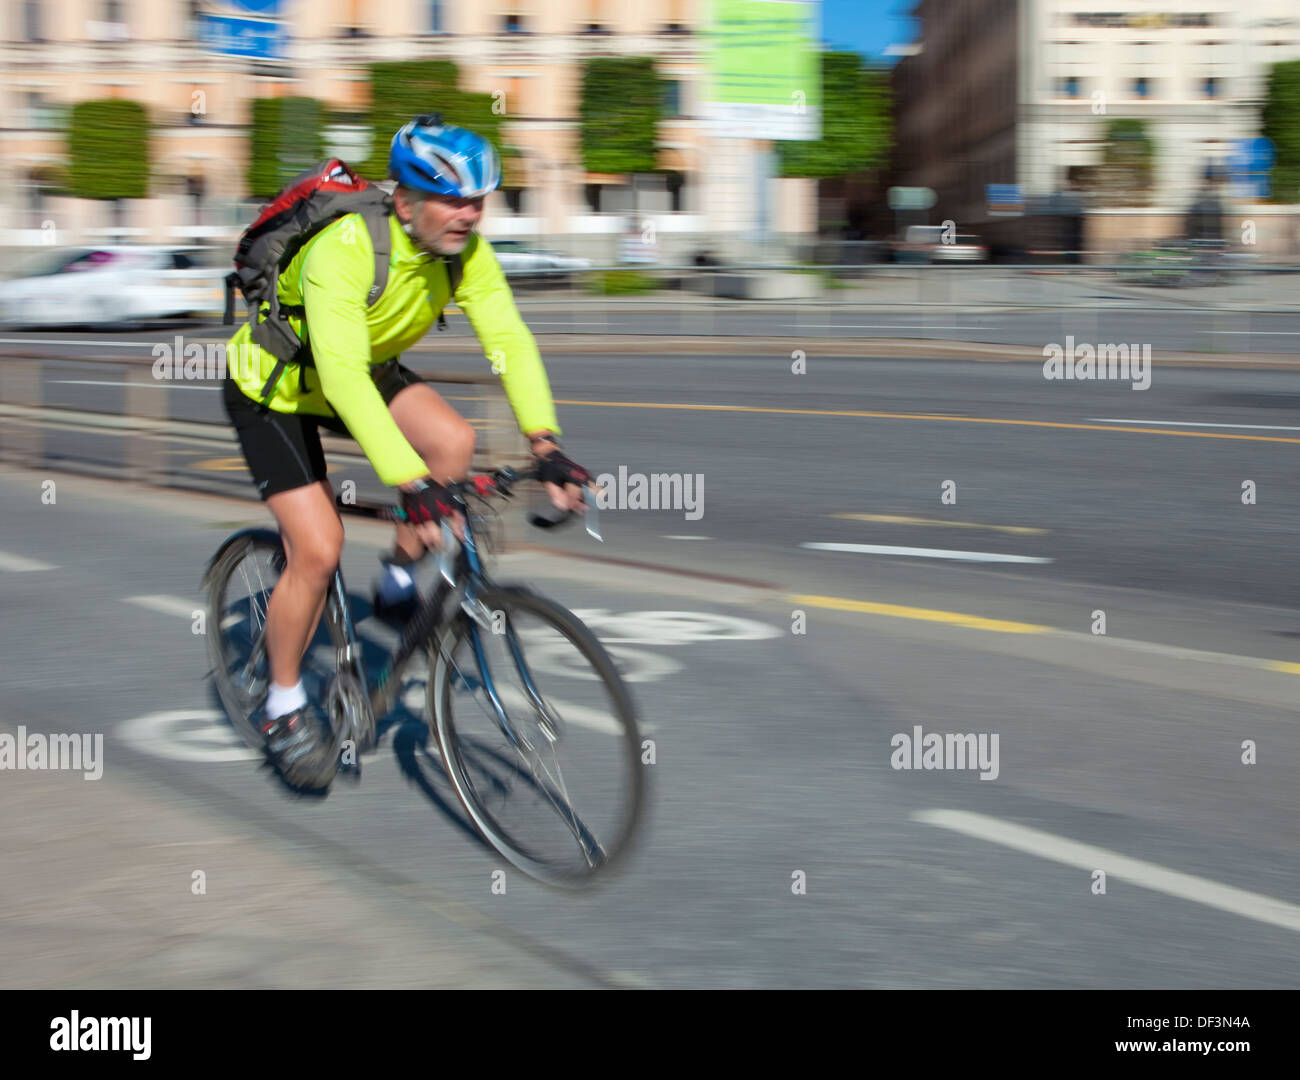 Sweden, Stockholm - bicyclist in a bike lane Stock Photo